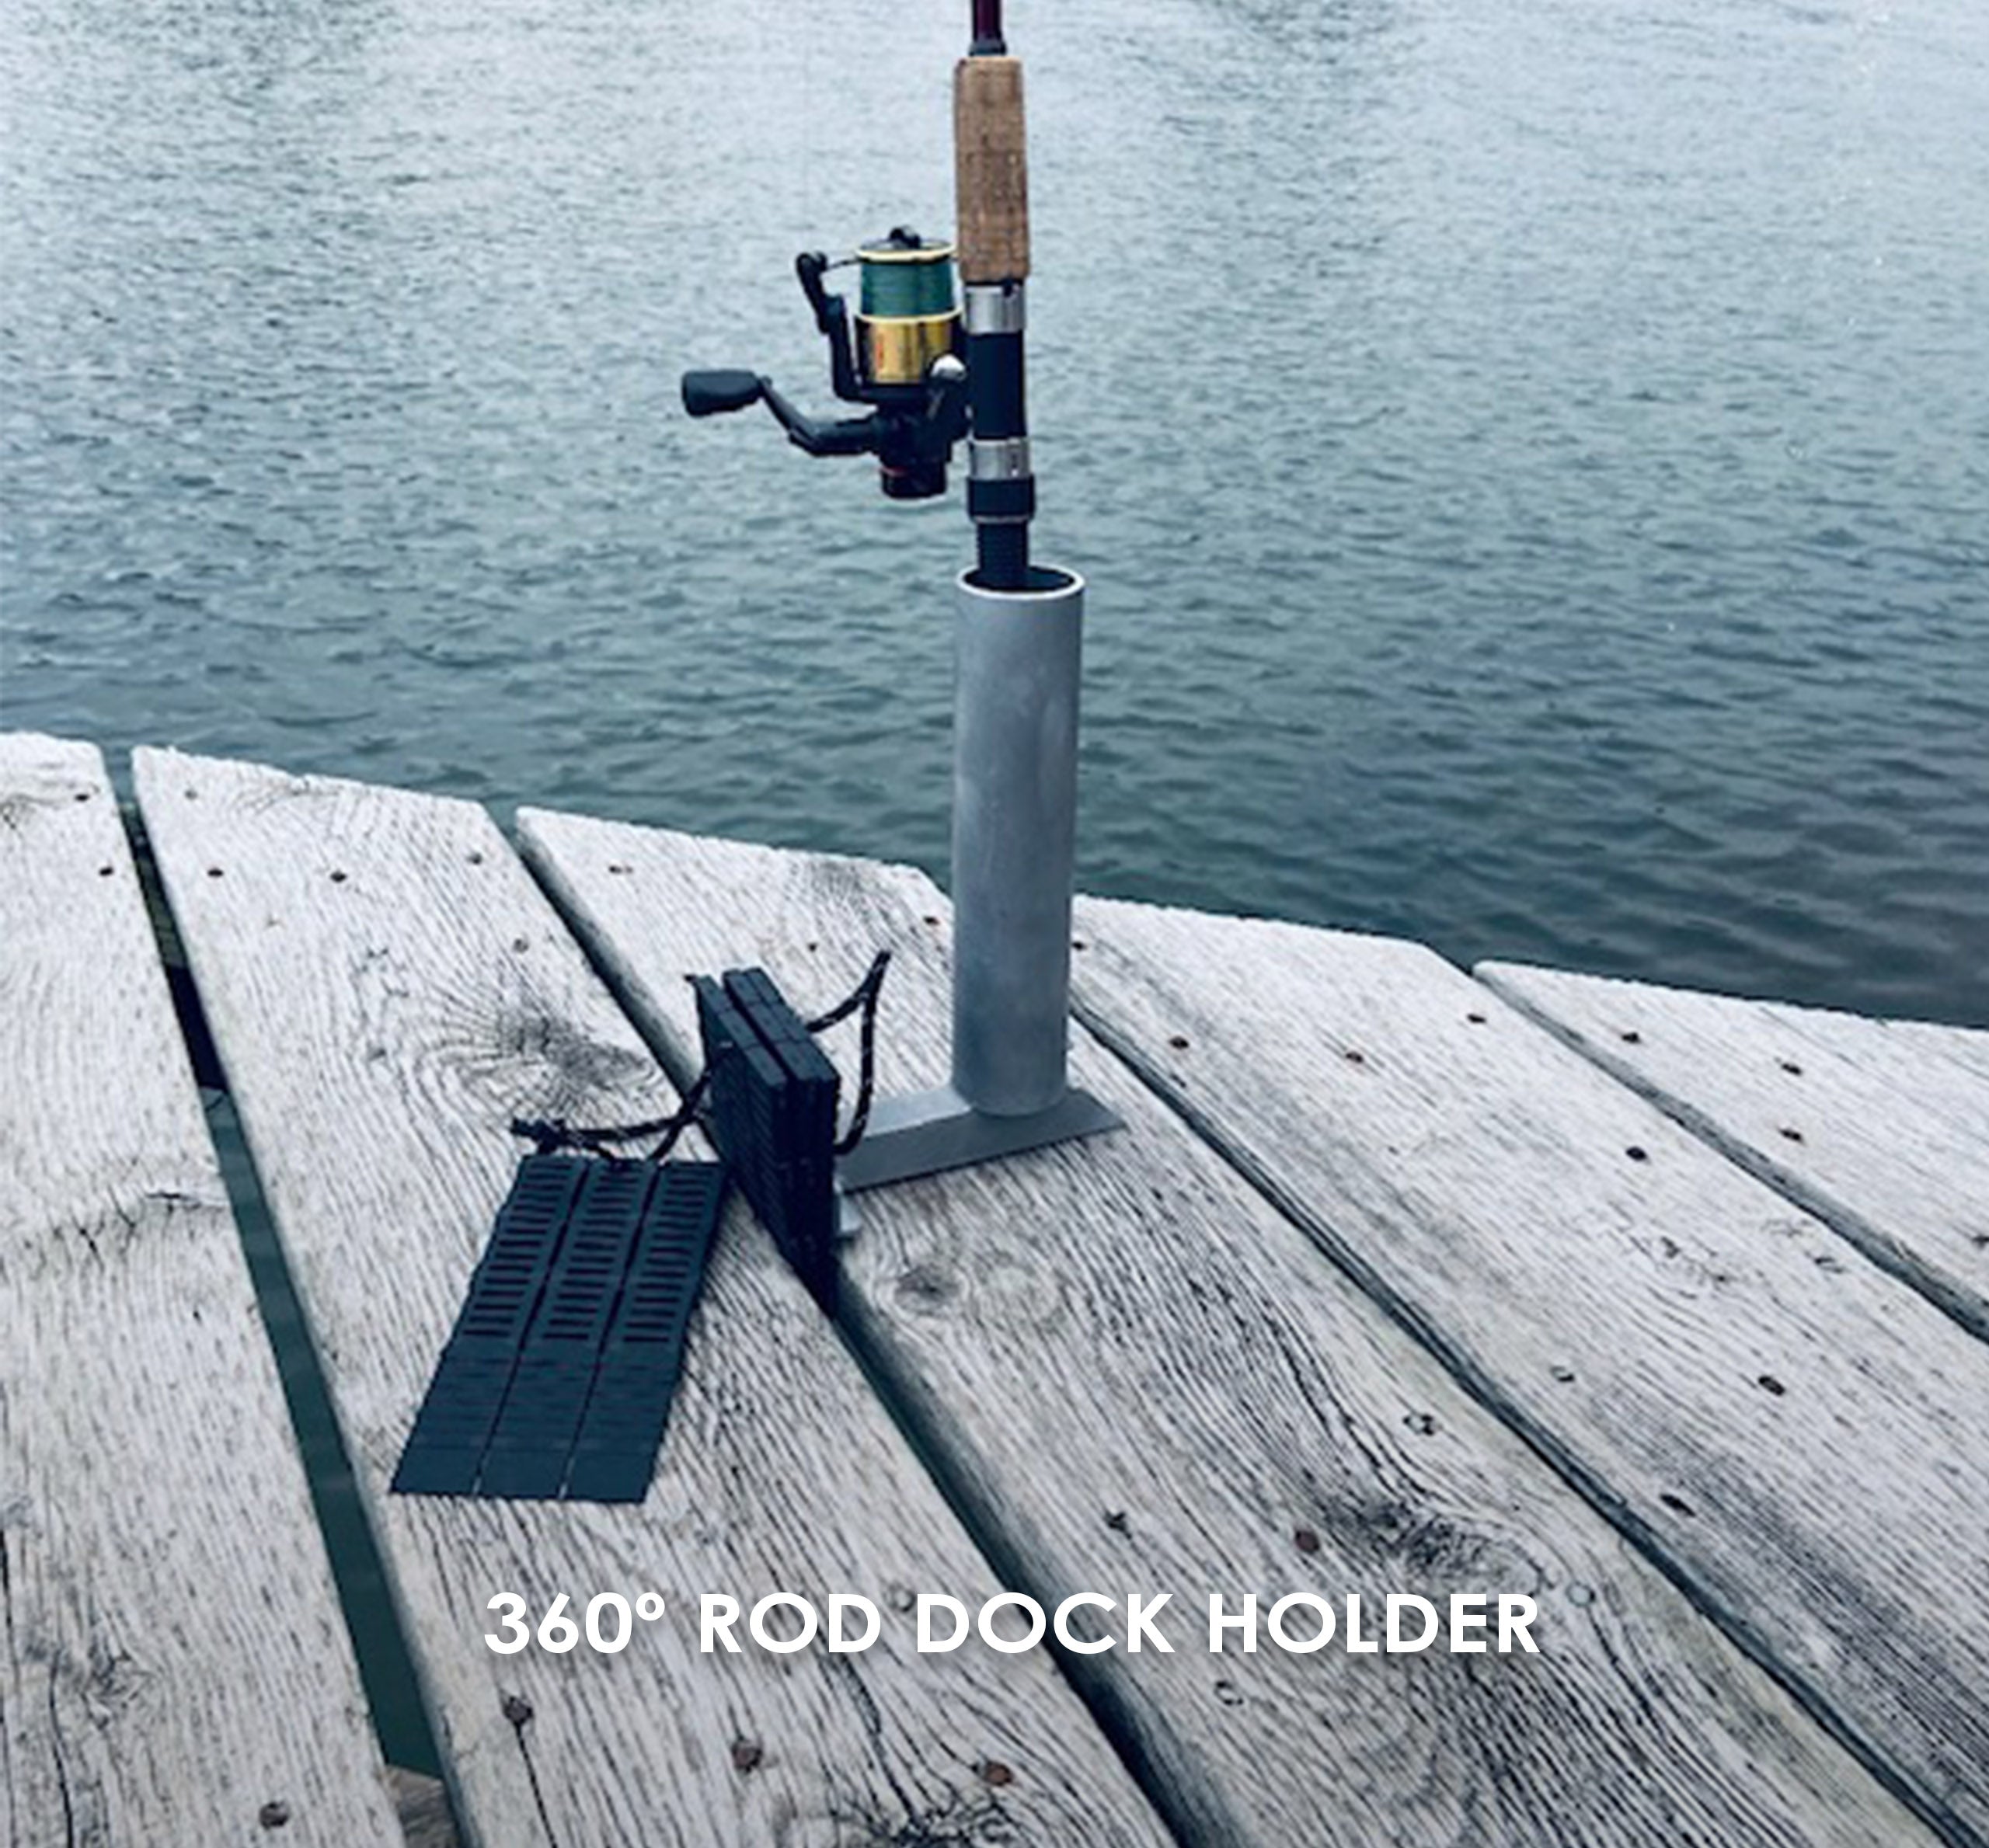 Dock-A-Rod 60 Degree Fishing Rod Holder for Dock or Boat Made in